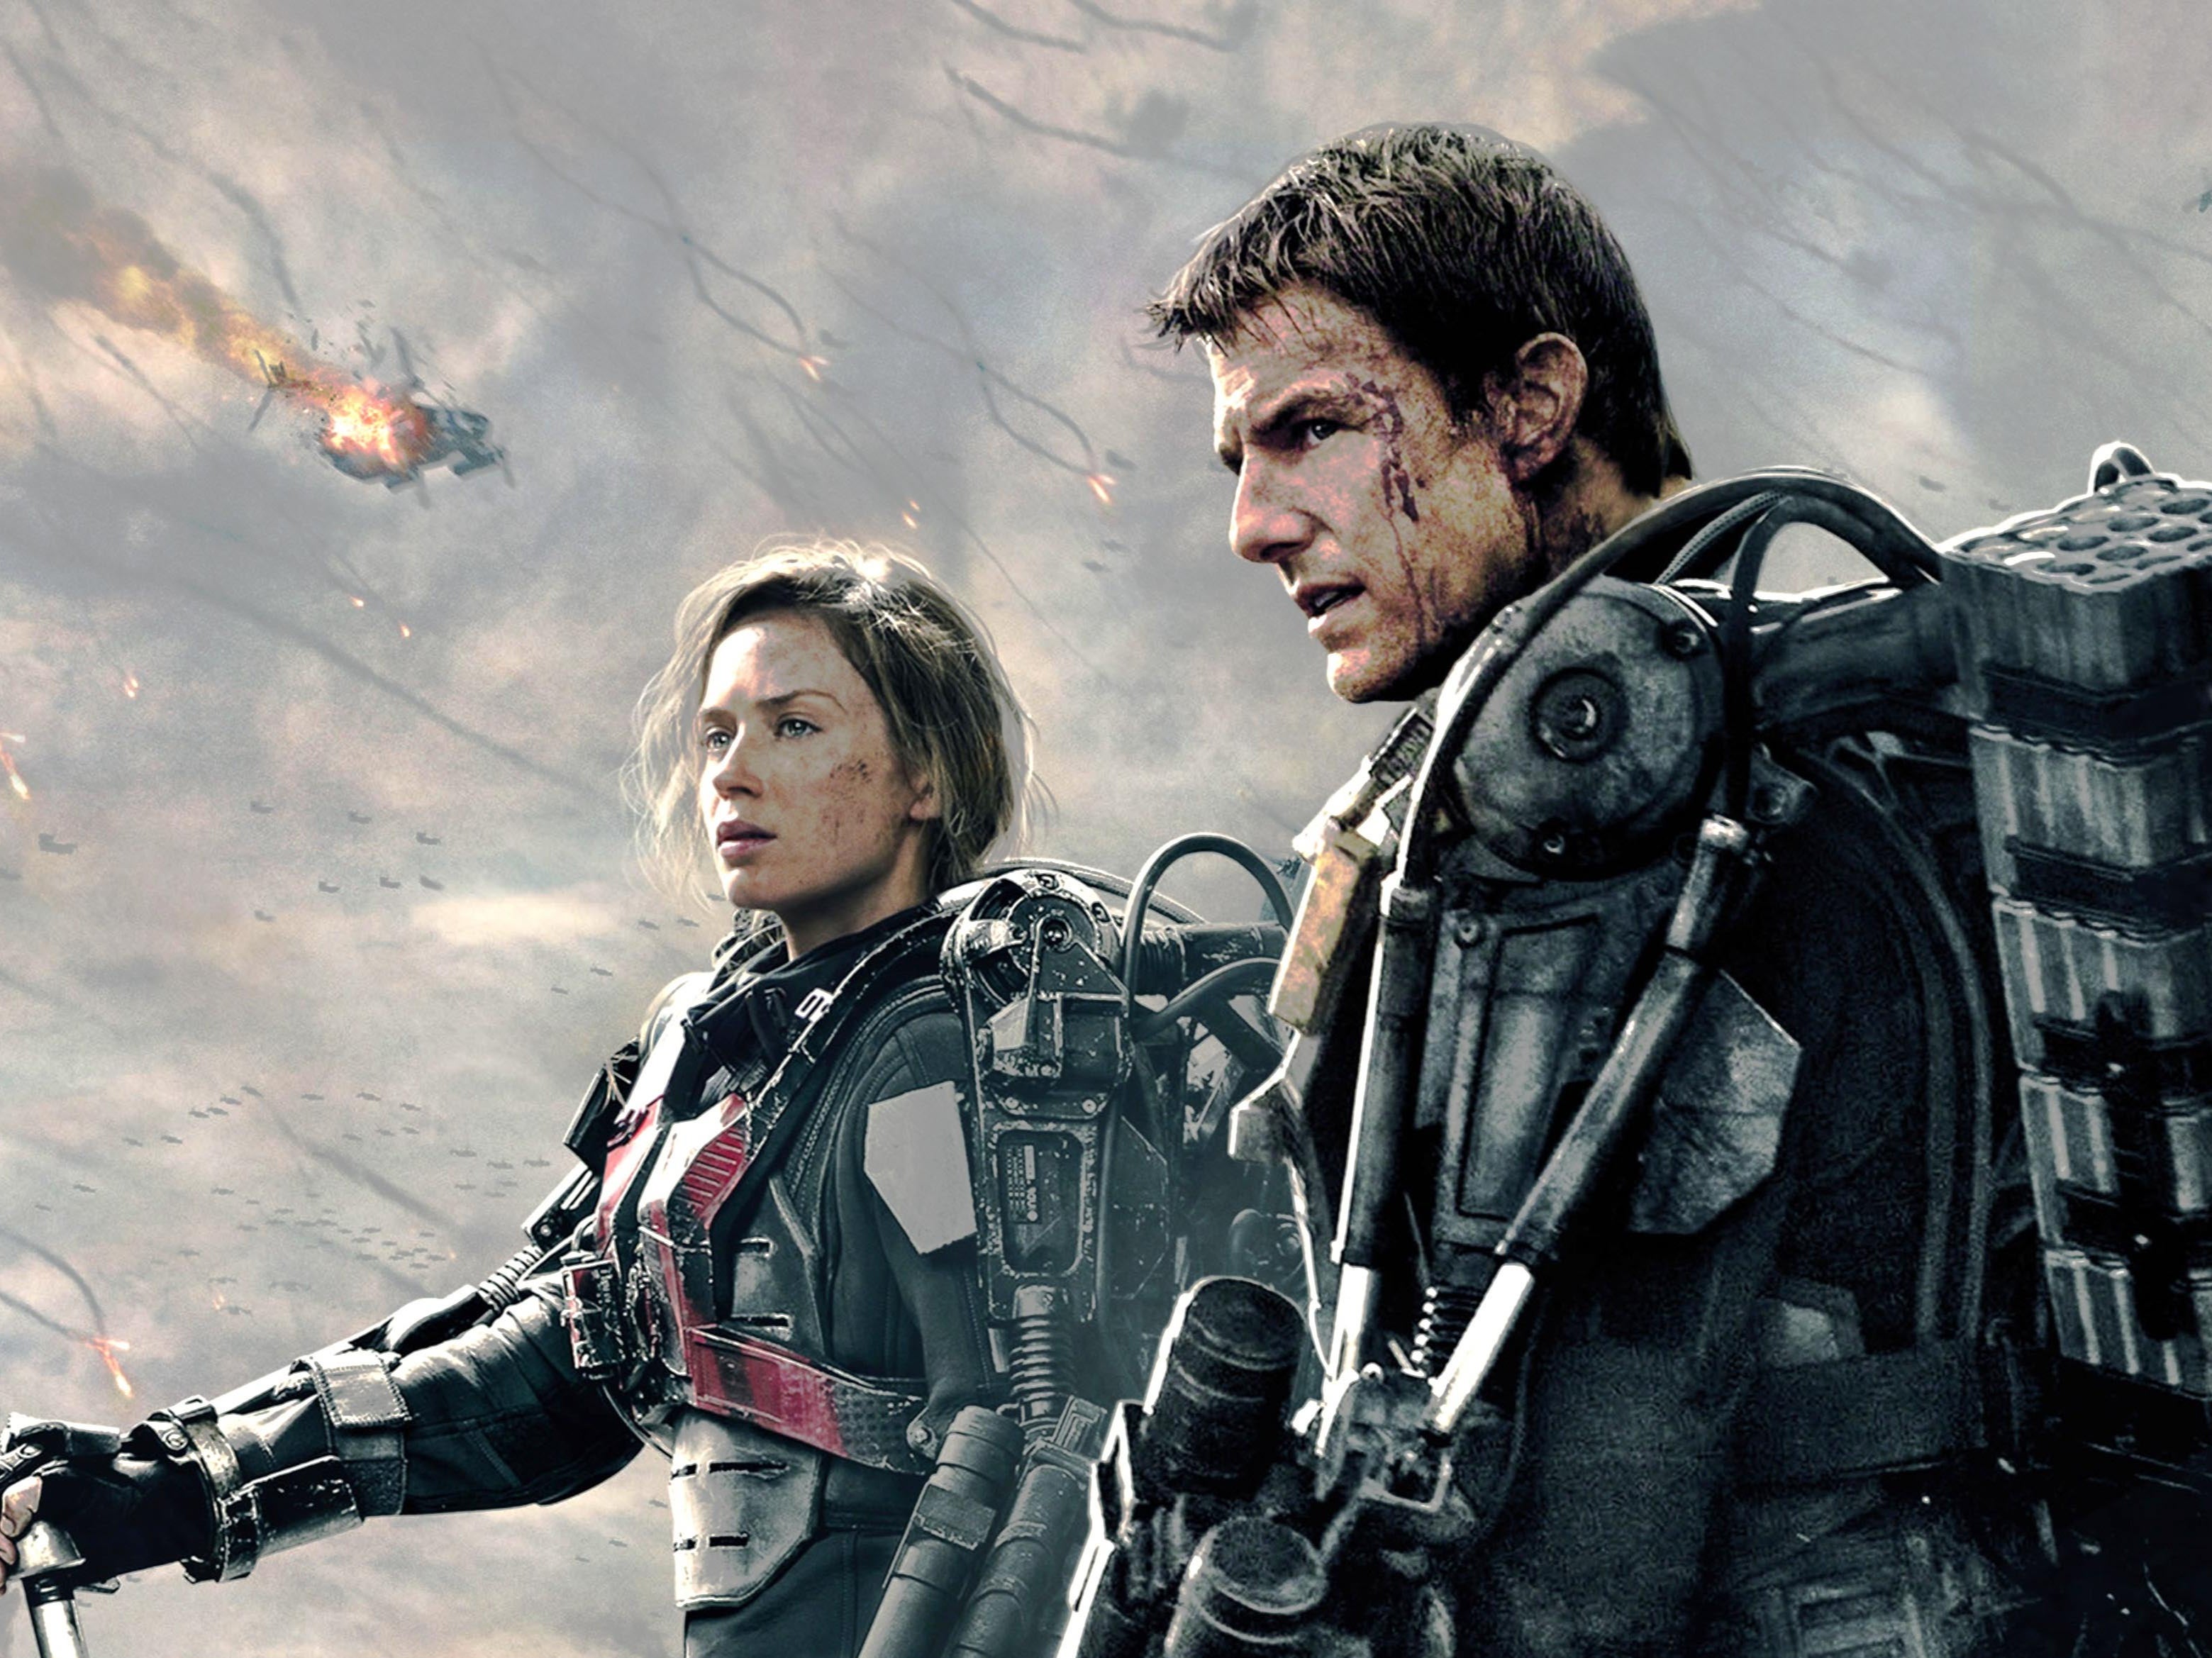 Emily Bunt and Tom Cruise in ‘Edge of Tomorrow’